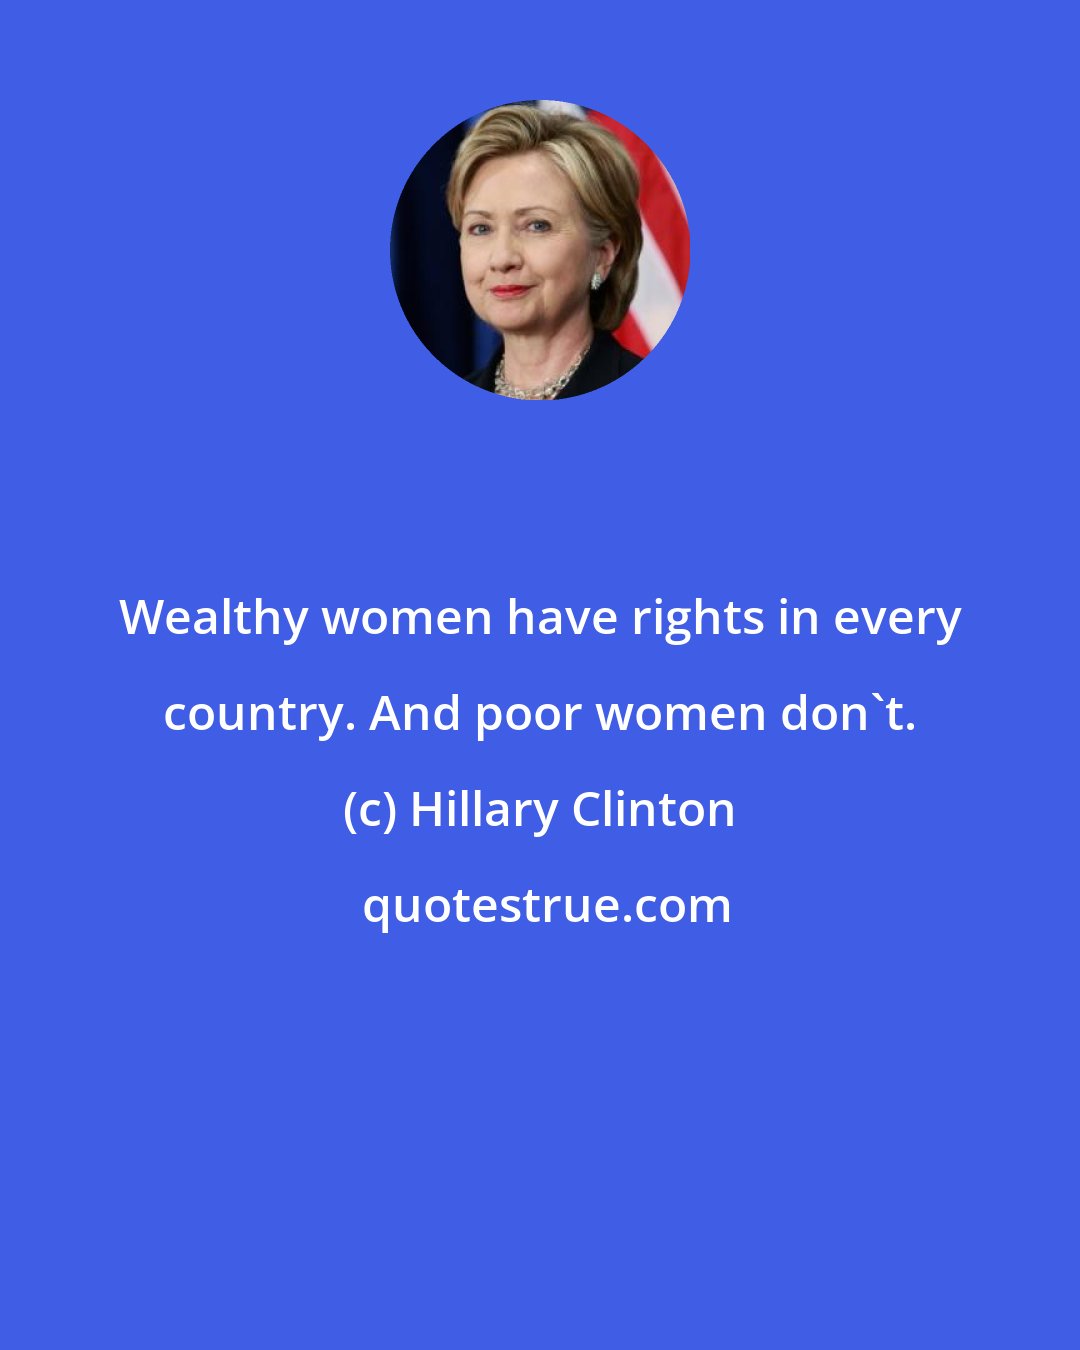 Hillary Clinton: Wealthy women have rights in every country. And poor women don't.